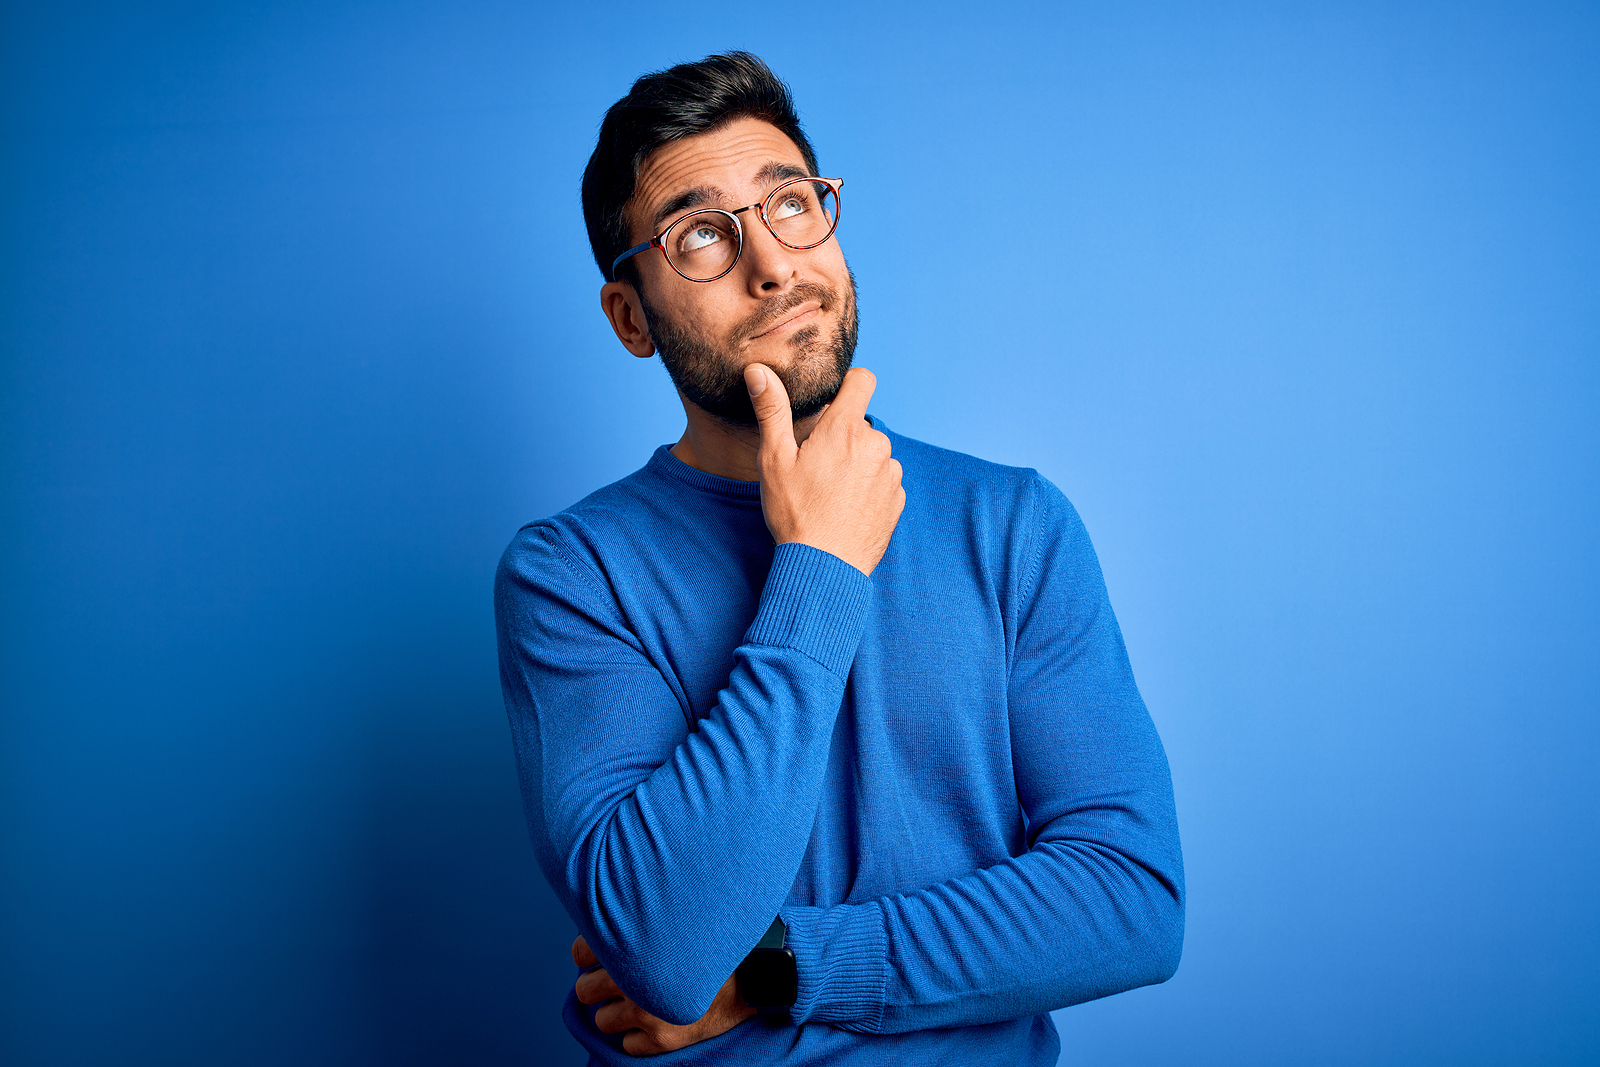 Young handsome man with beard wearing casual sweater and glasses over blue background thinking about something.